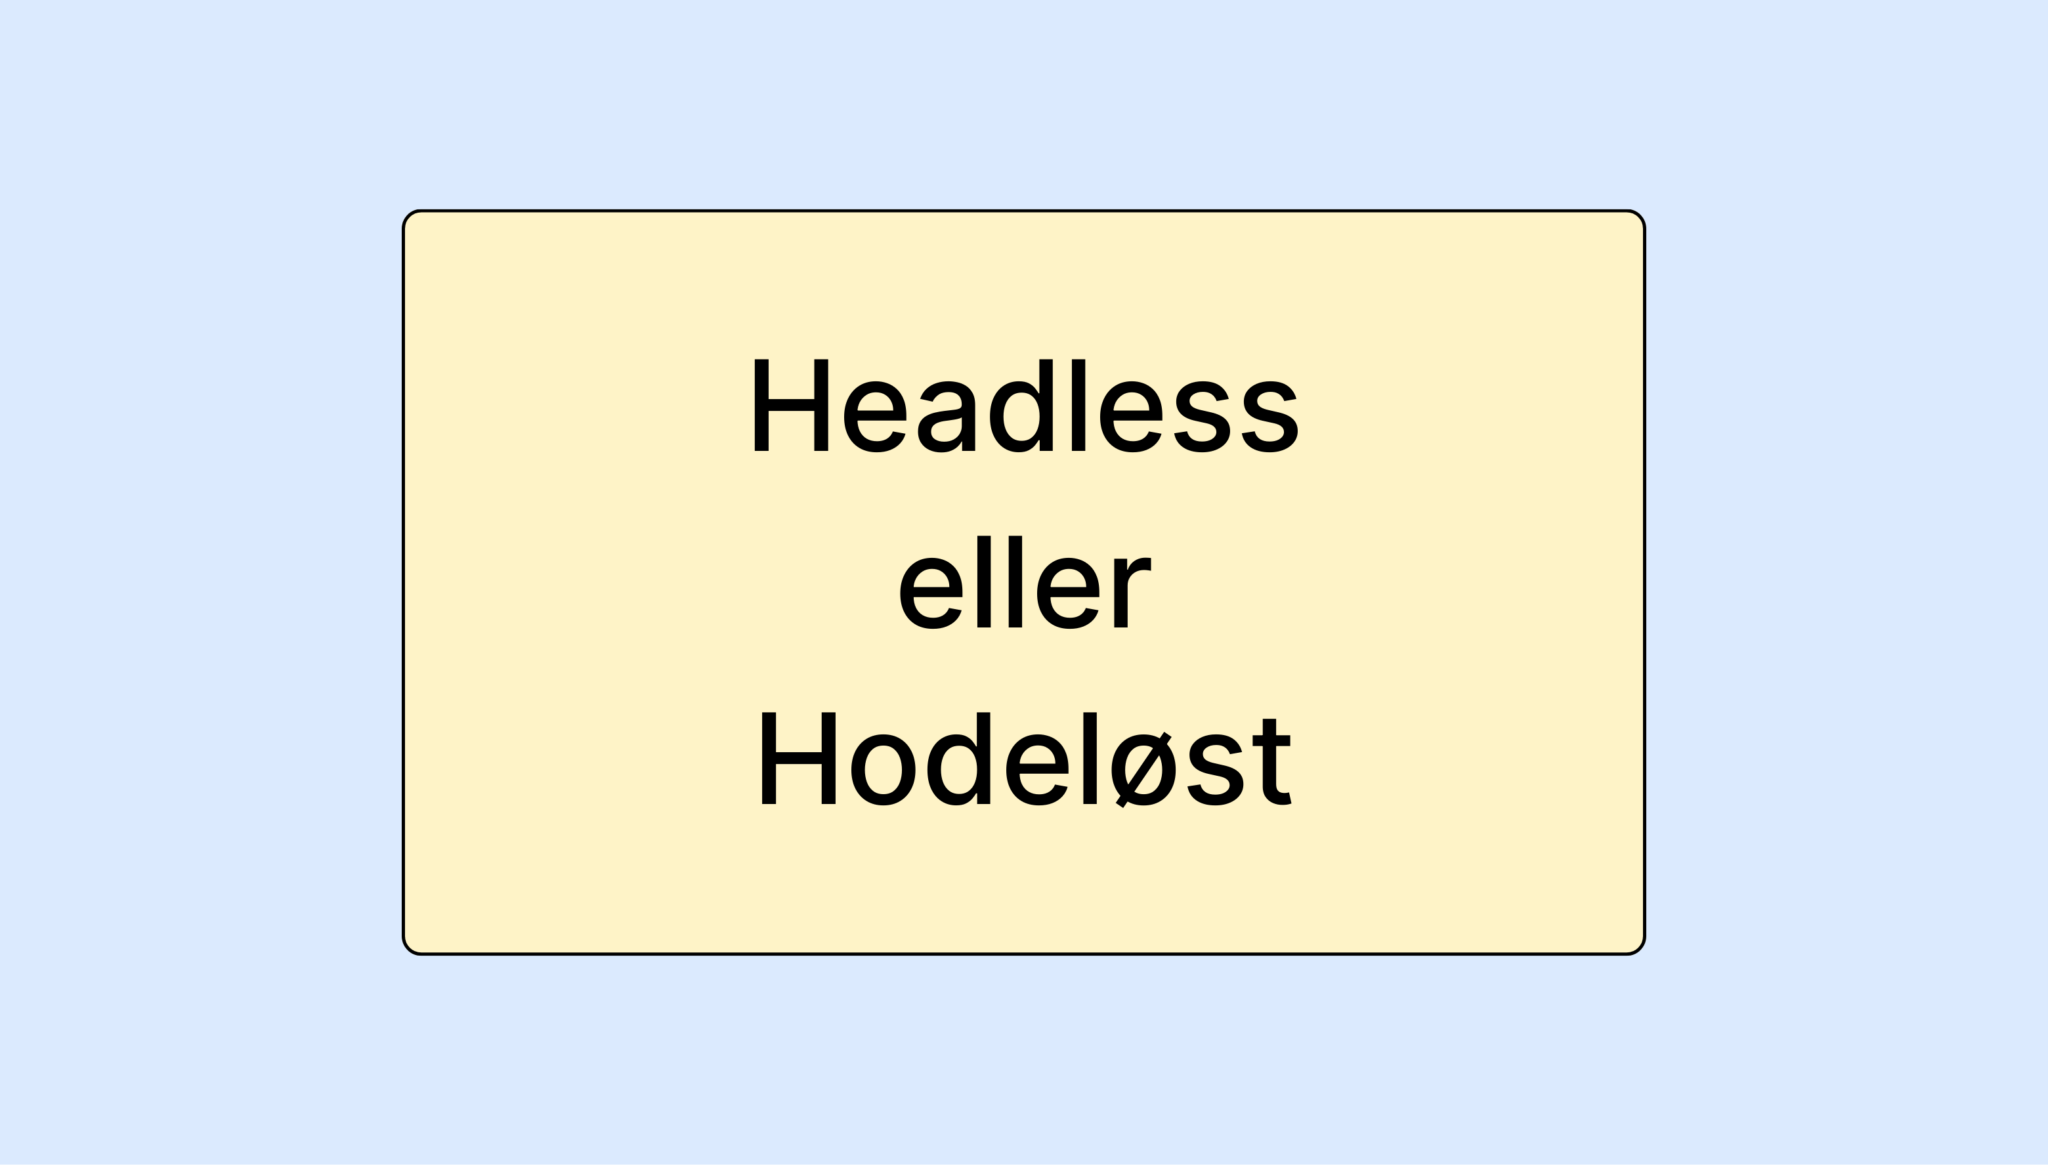 Image with a light blue background, and a bright yellow square with the text "Headless eller Hodeløst"